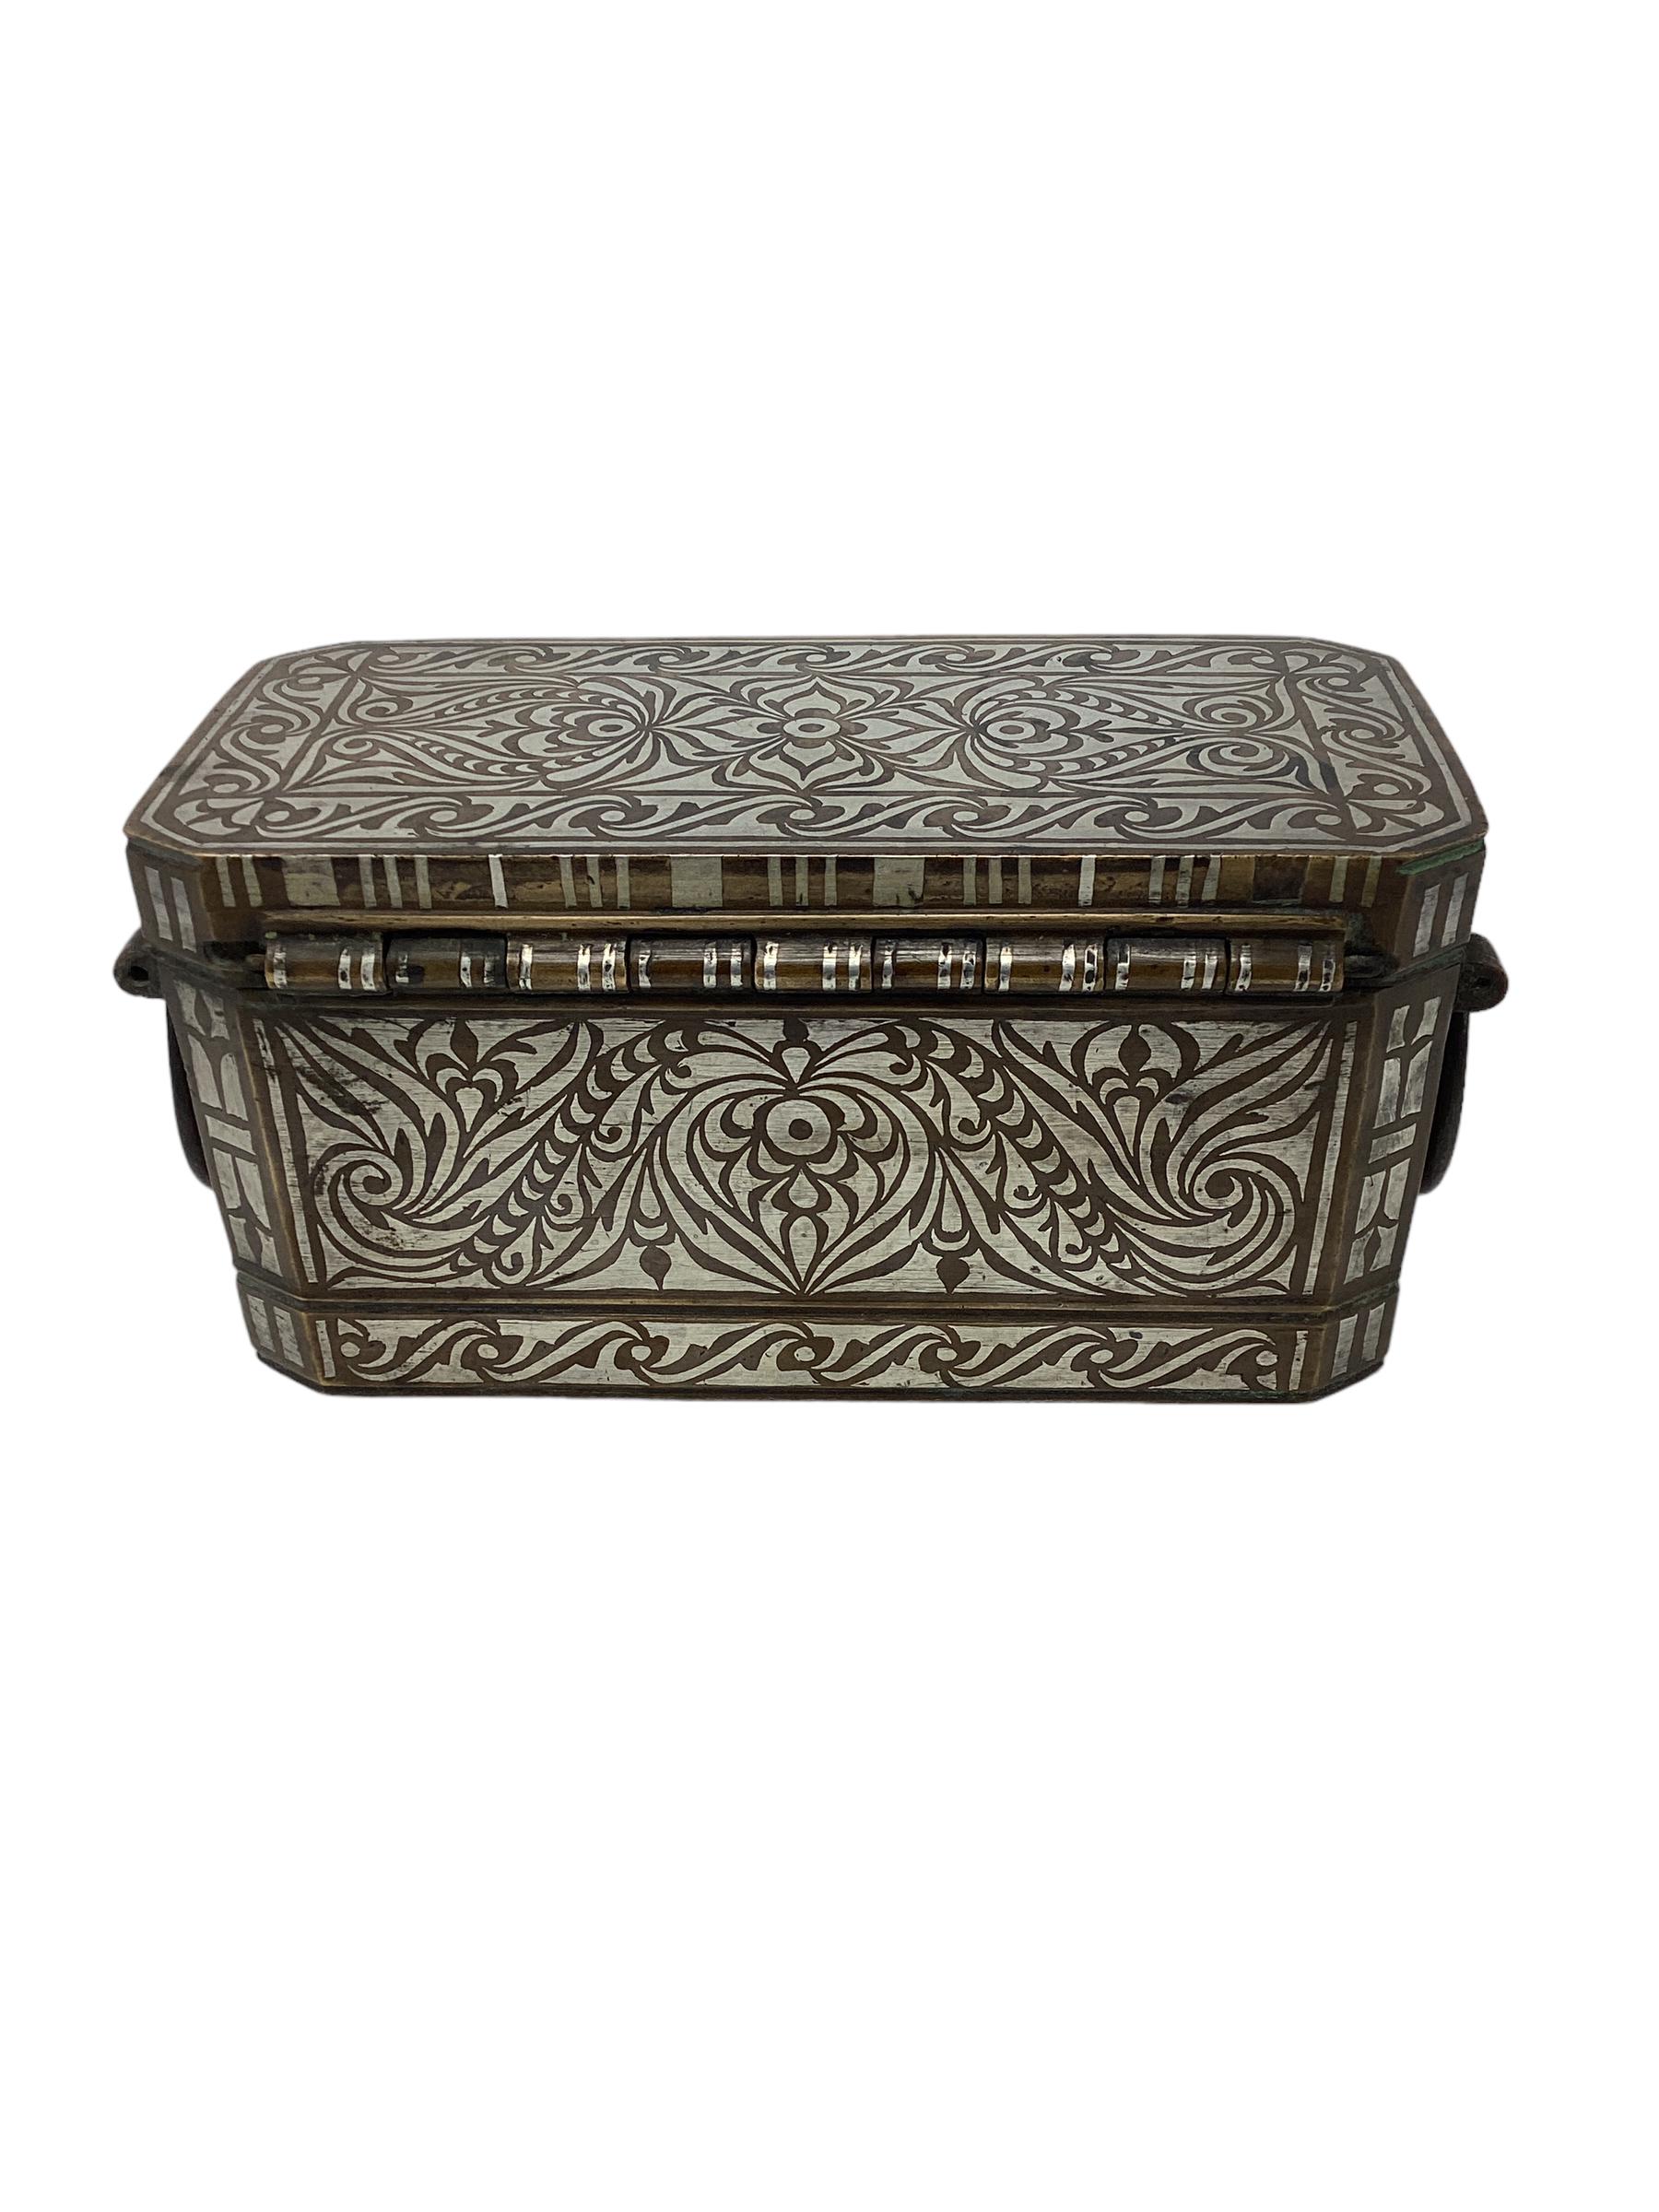 Tribal  Antique Bronze and Silver Inlaid Betel Nut Box For Sale